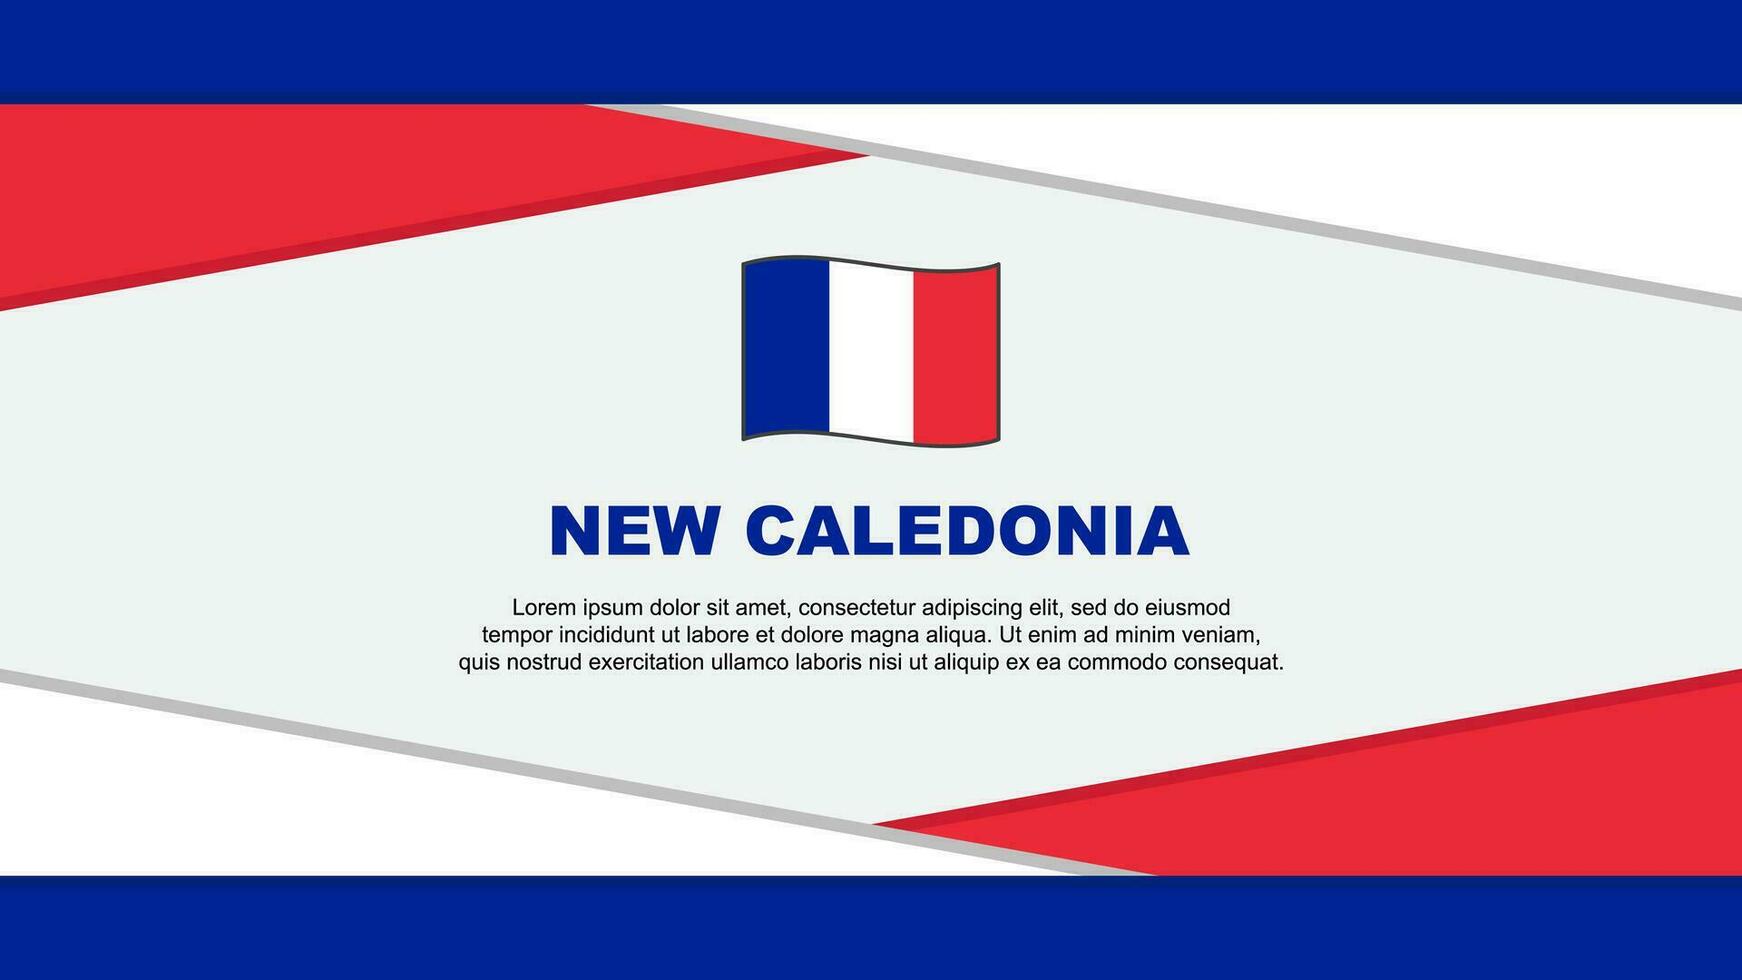 New Caledonia Flag Abstract Background Design Template. New Caledonia Independence Day Banner Cartoon Vector Illustration. New Caledonia Vector